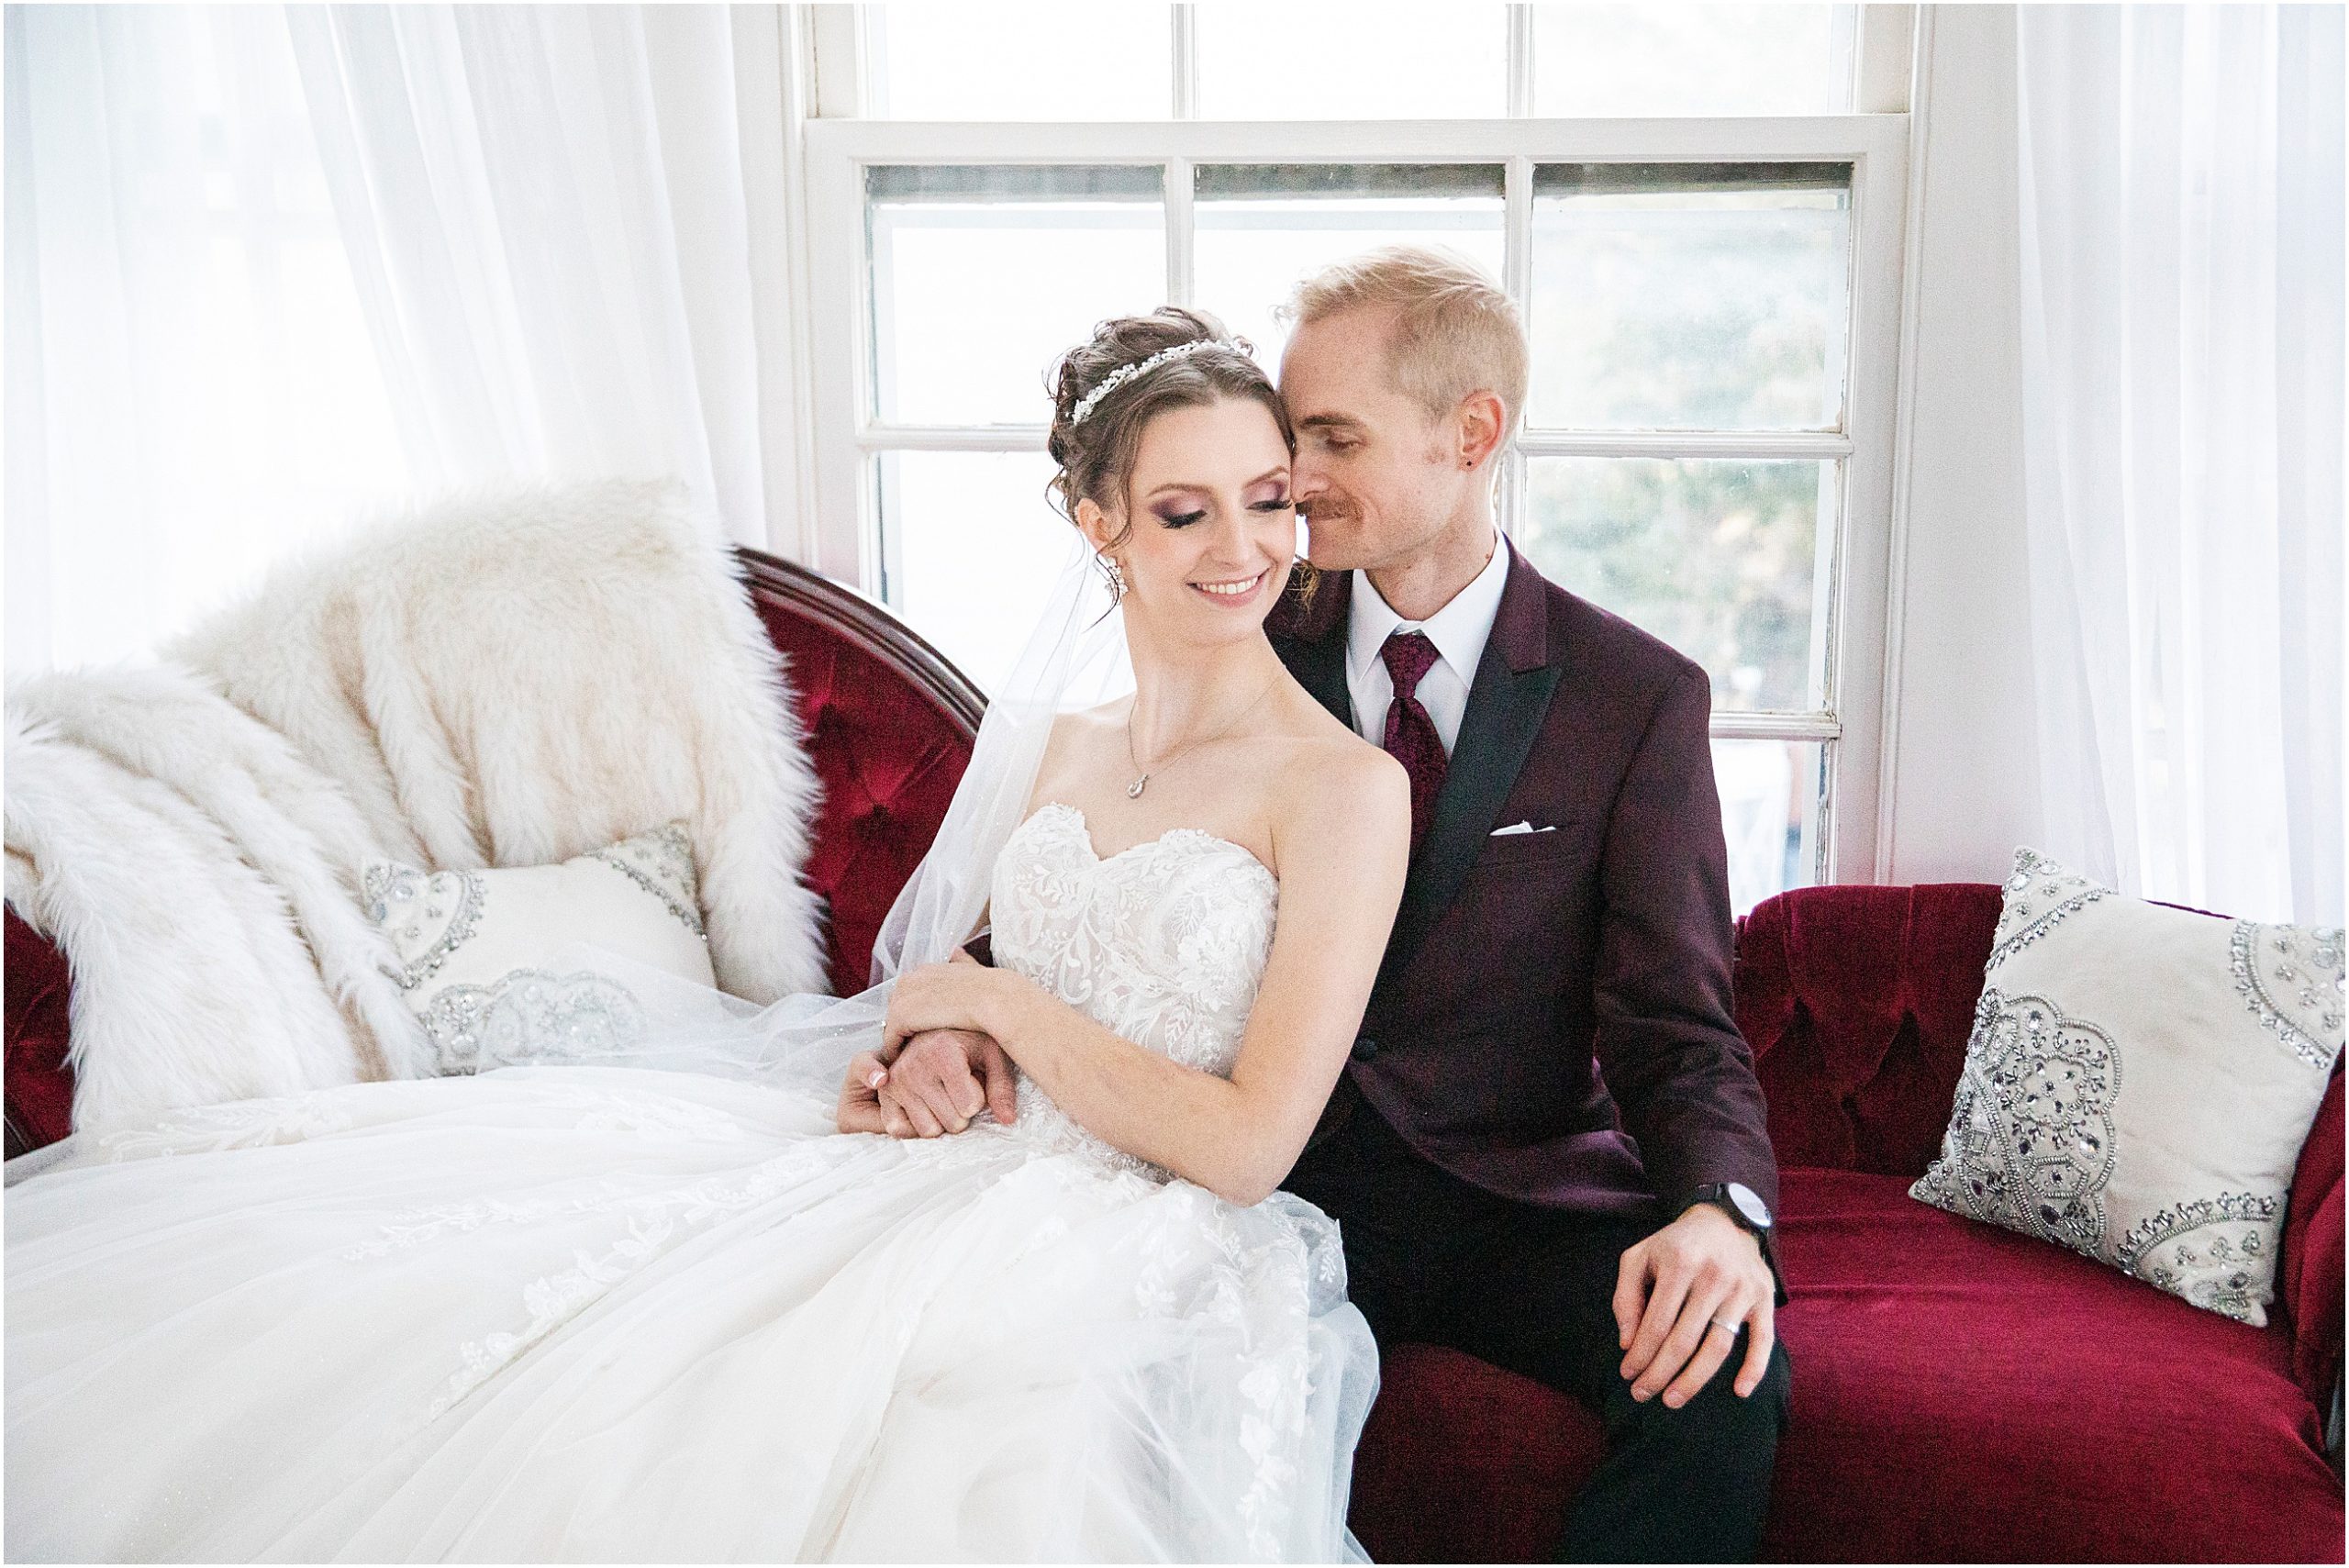 Bride and groom snuggle together for a romantic moment on their wedding day